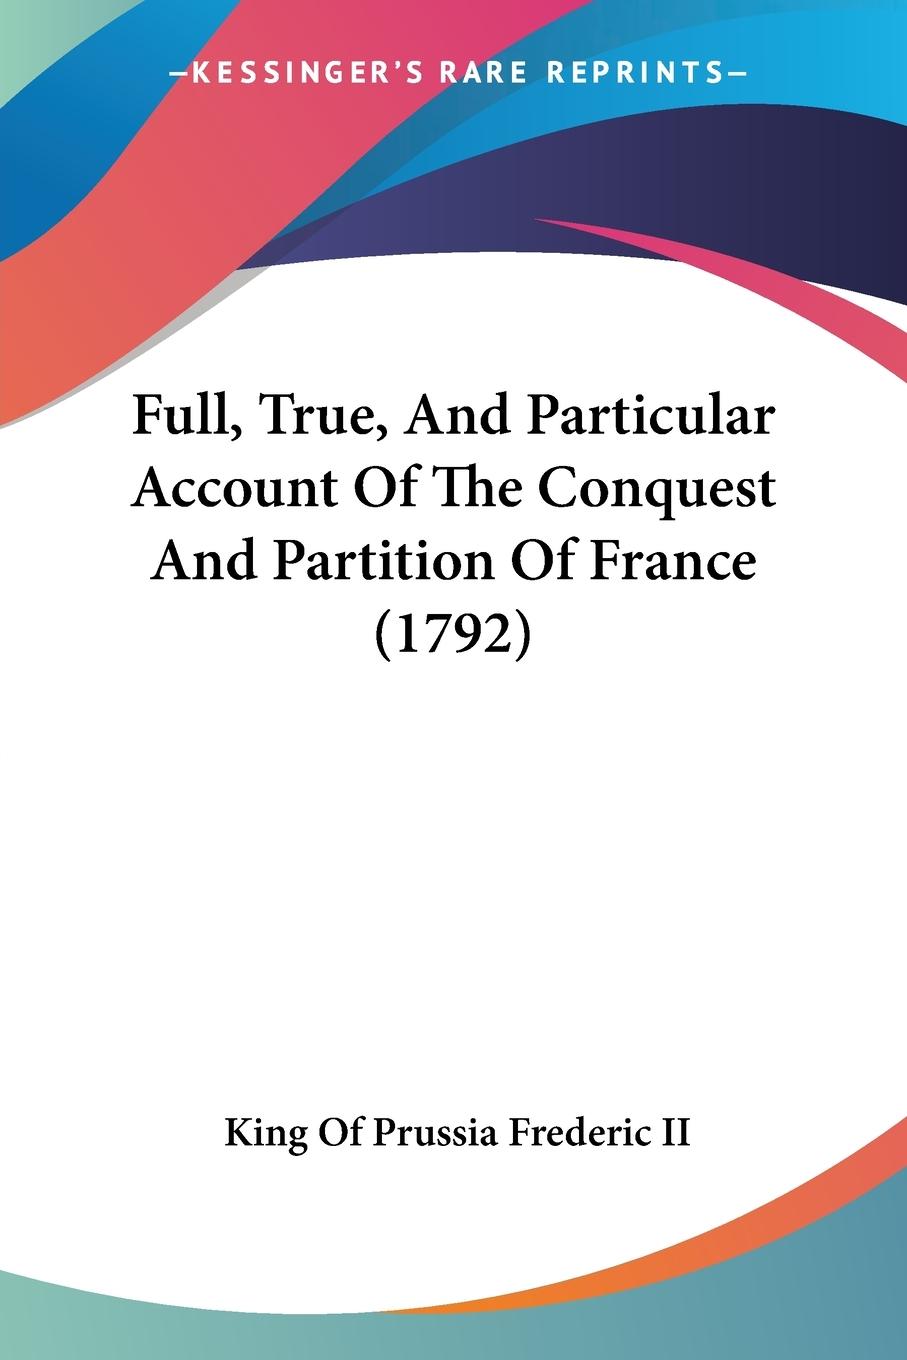 Full, True, And Particular Account Of The Conquest And Partition Of France (1792) - Frederic II, King Of Prussia